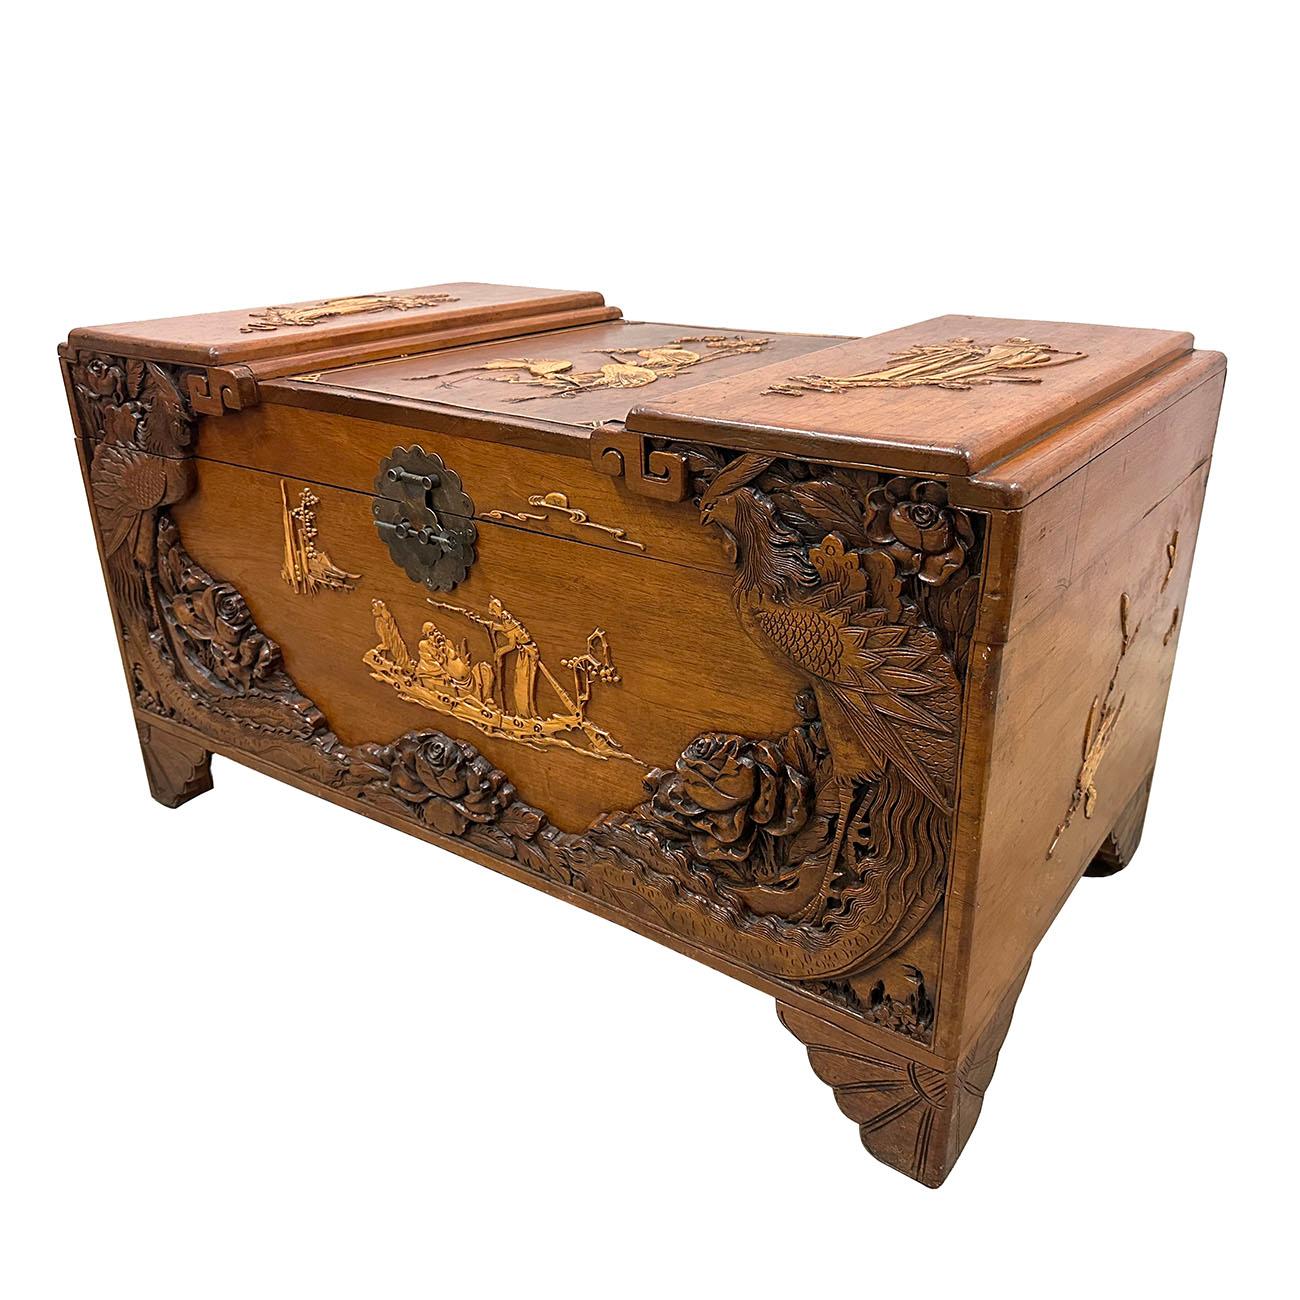 This is a traditional style of Chinese antique raise carved/relief Camphor chest/trunk from China. It was sailor's hope chest with all the sailor's best wishes and hopes in it. This chest has detailed carving works of Phoenix and Peonies on the